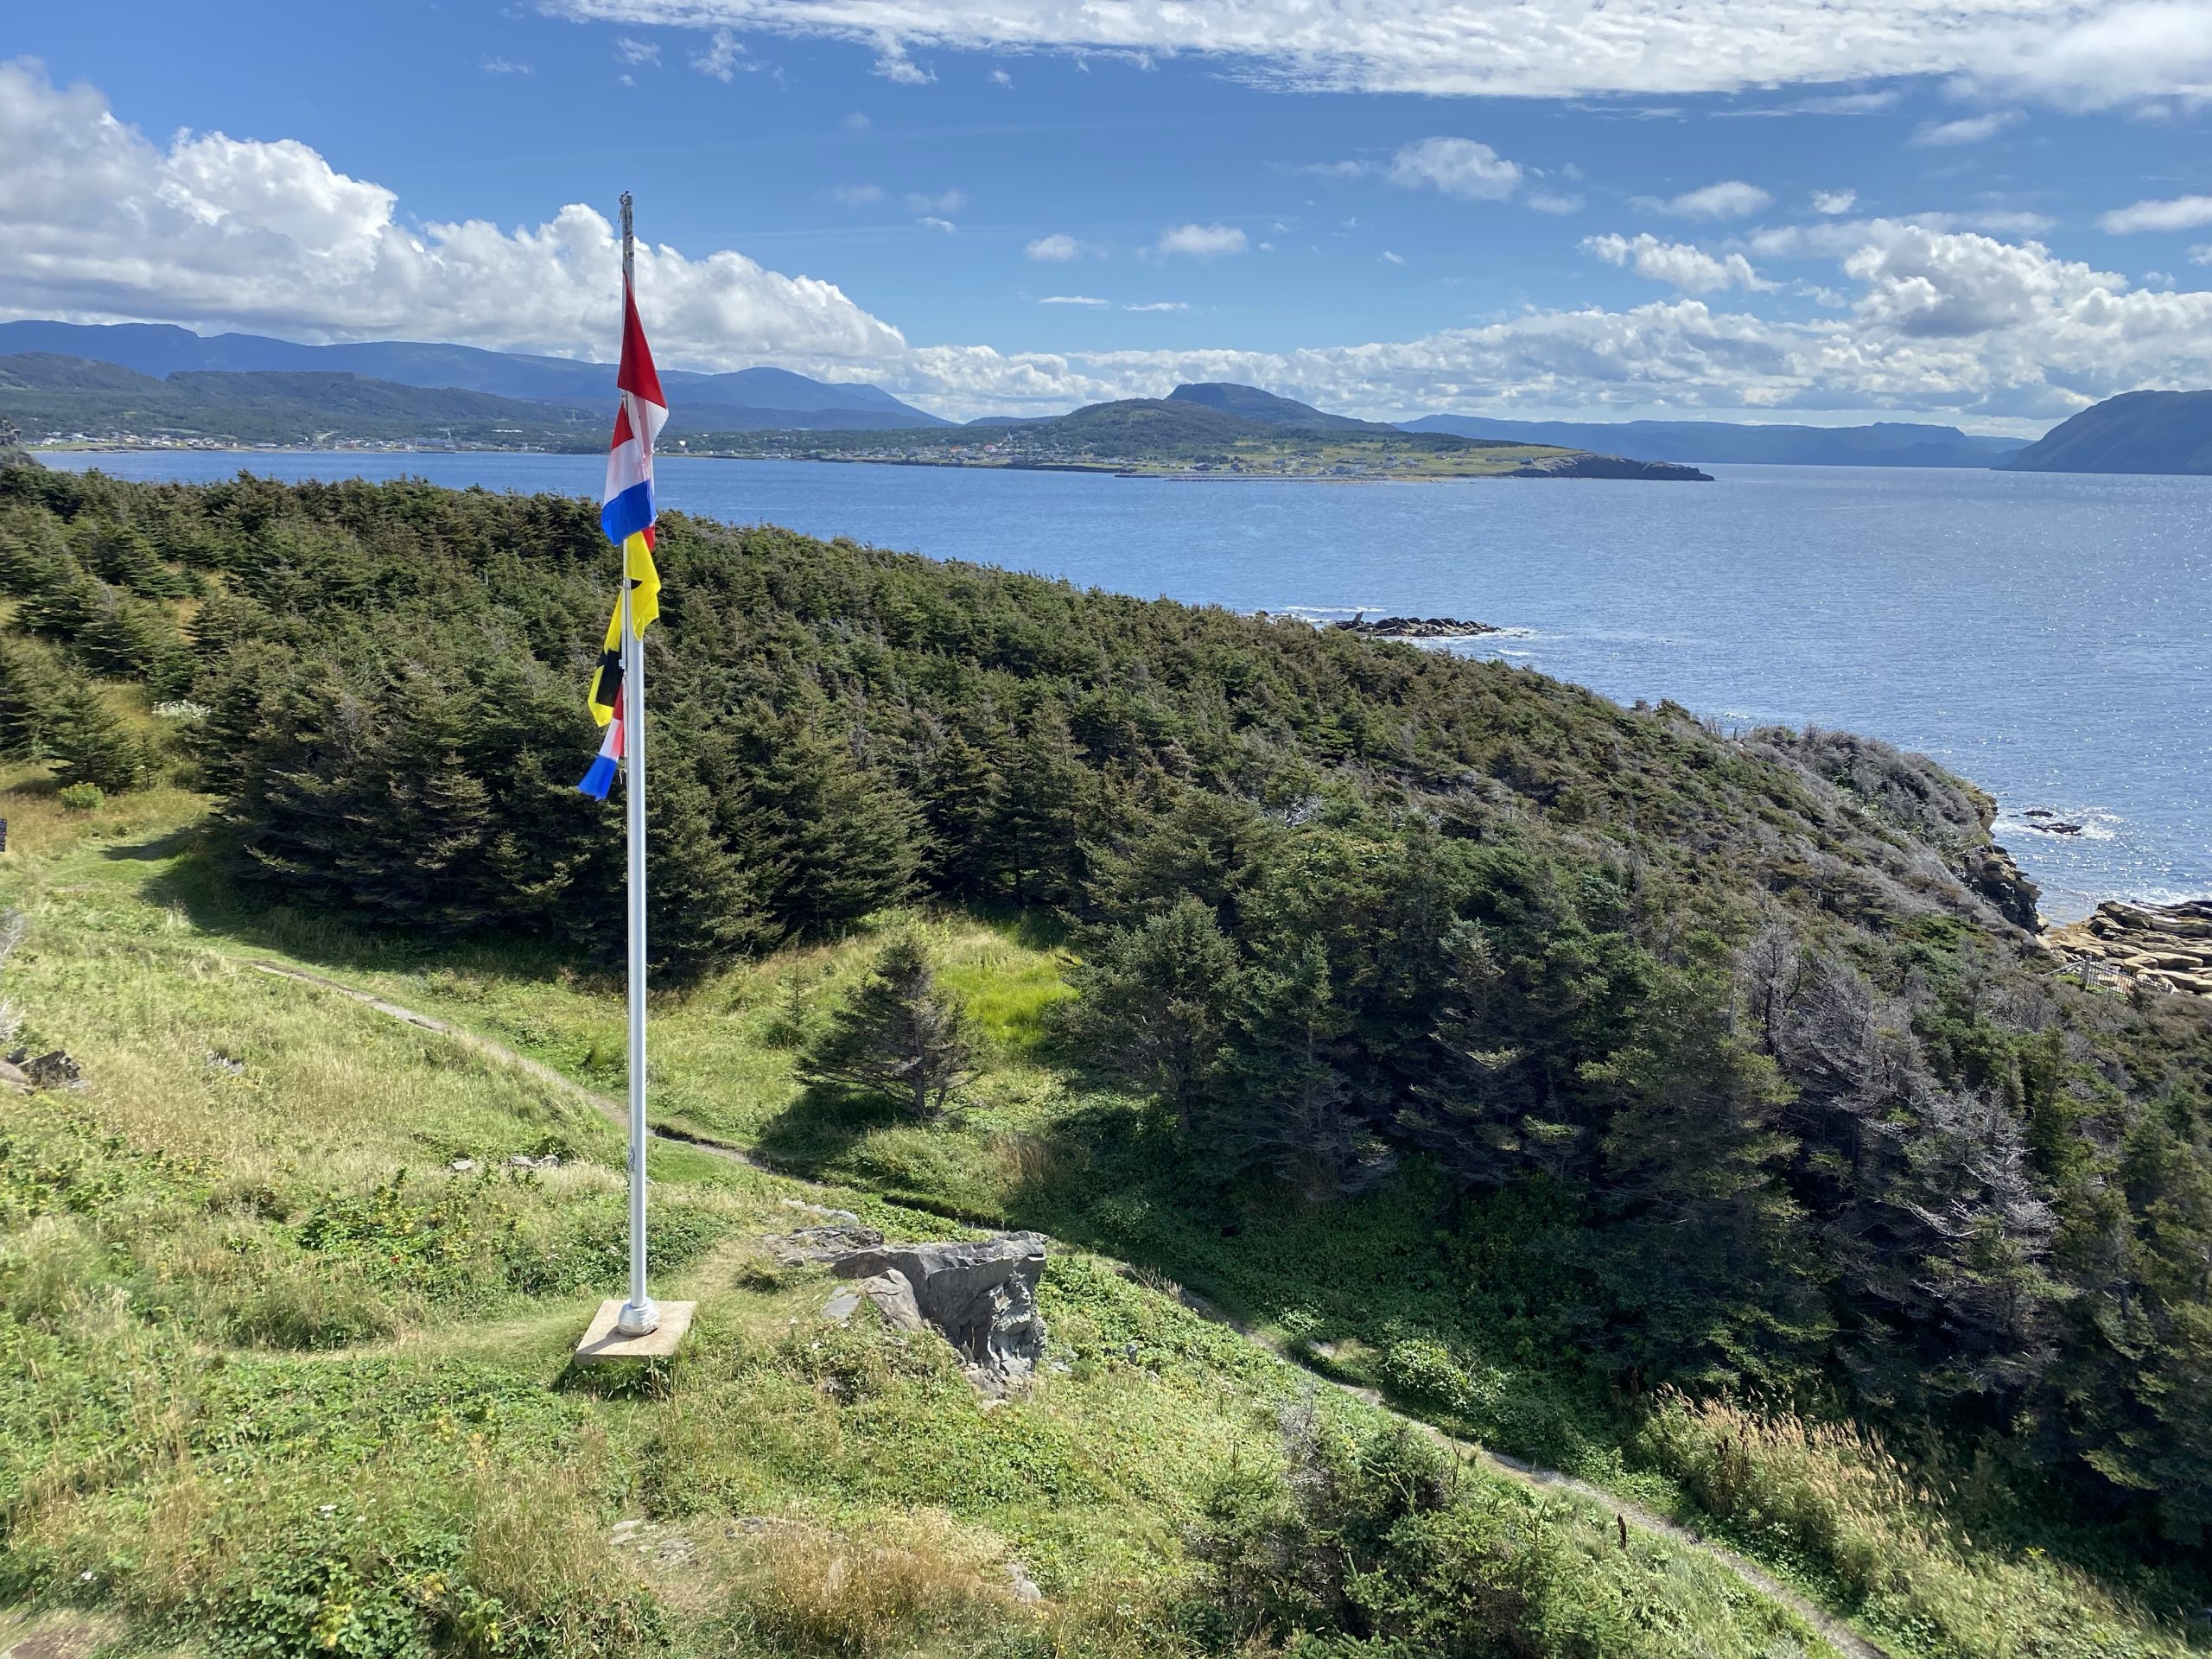 A view of Rocky Harbour, where we stayed the night a few days ago, from the Lobster Cove lighthouse, in Newfoundland.